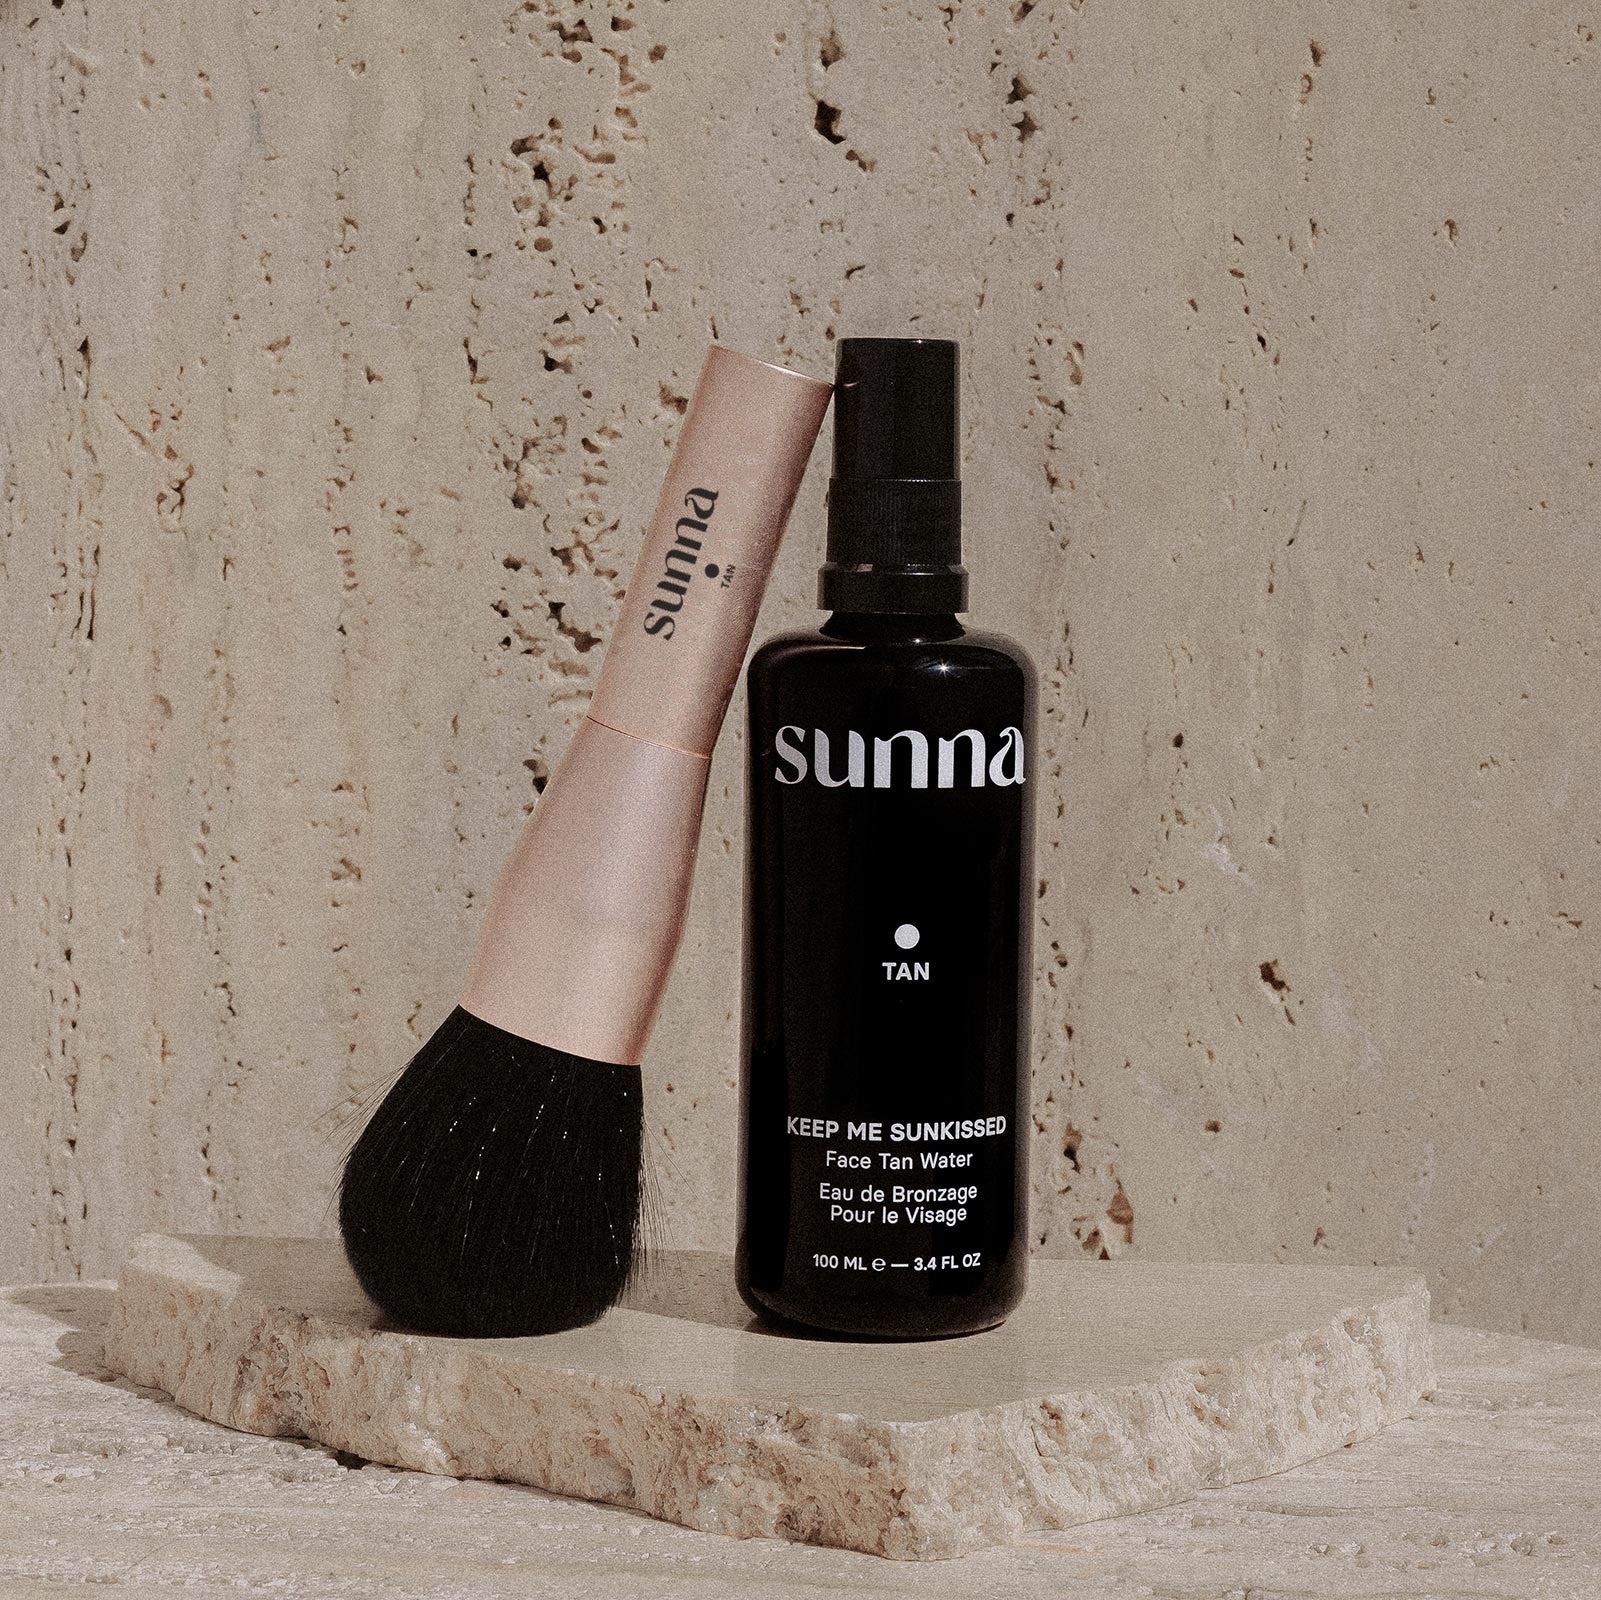 An image of Sunna tanning products. The set includes a black spray bottle labeled "Face Tan Water + Brush by Sunna" with anti-ageing ingredients and a makeup brush with a black bristle head and a gold handle. Both are placed on a beige stone slab against a matching textured background, promising glowing skin.